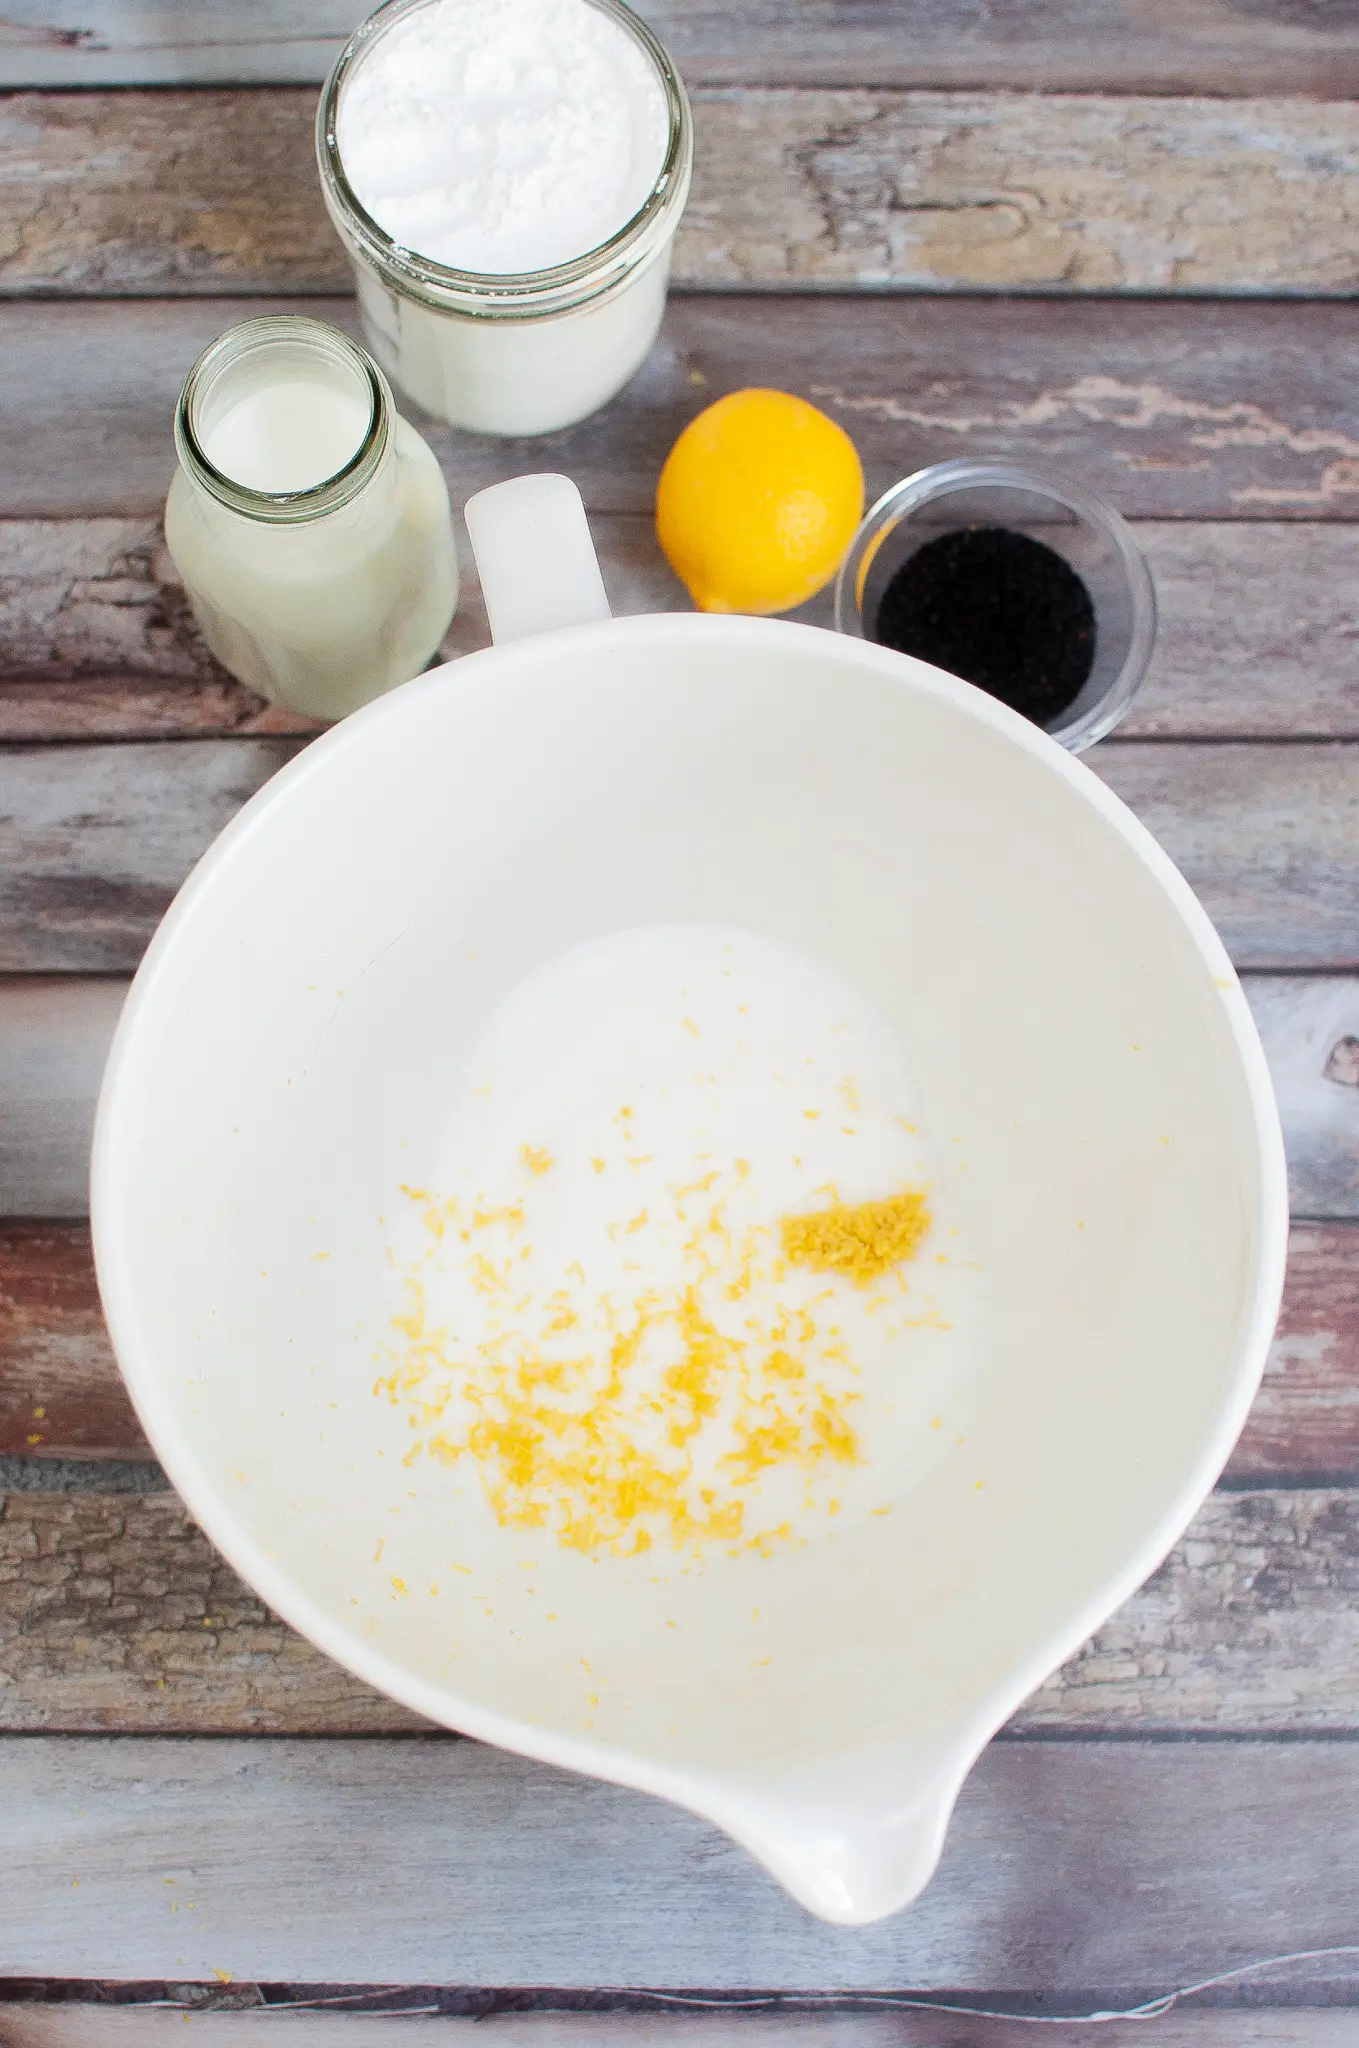 Ingredients for Lemon Poppyseed muffins in a mixing bowl.